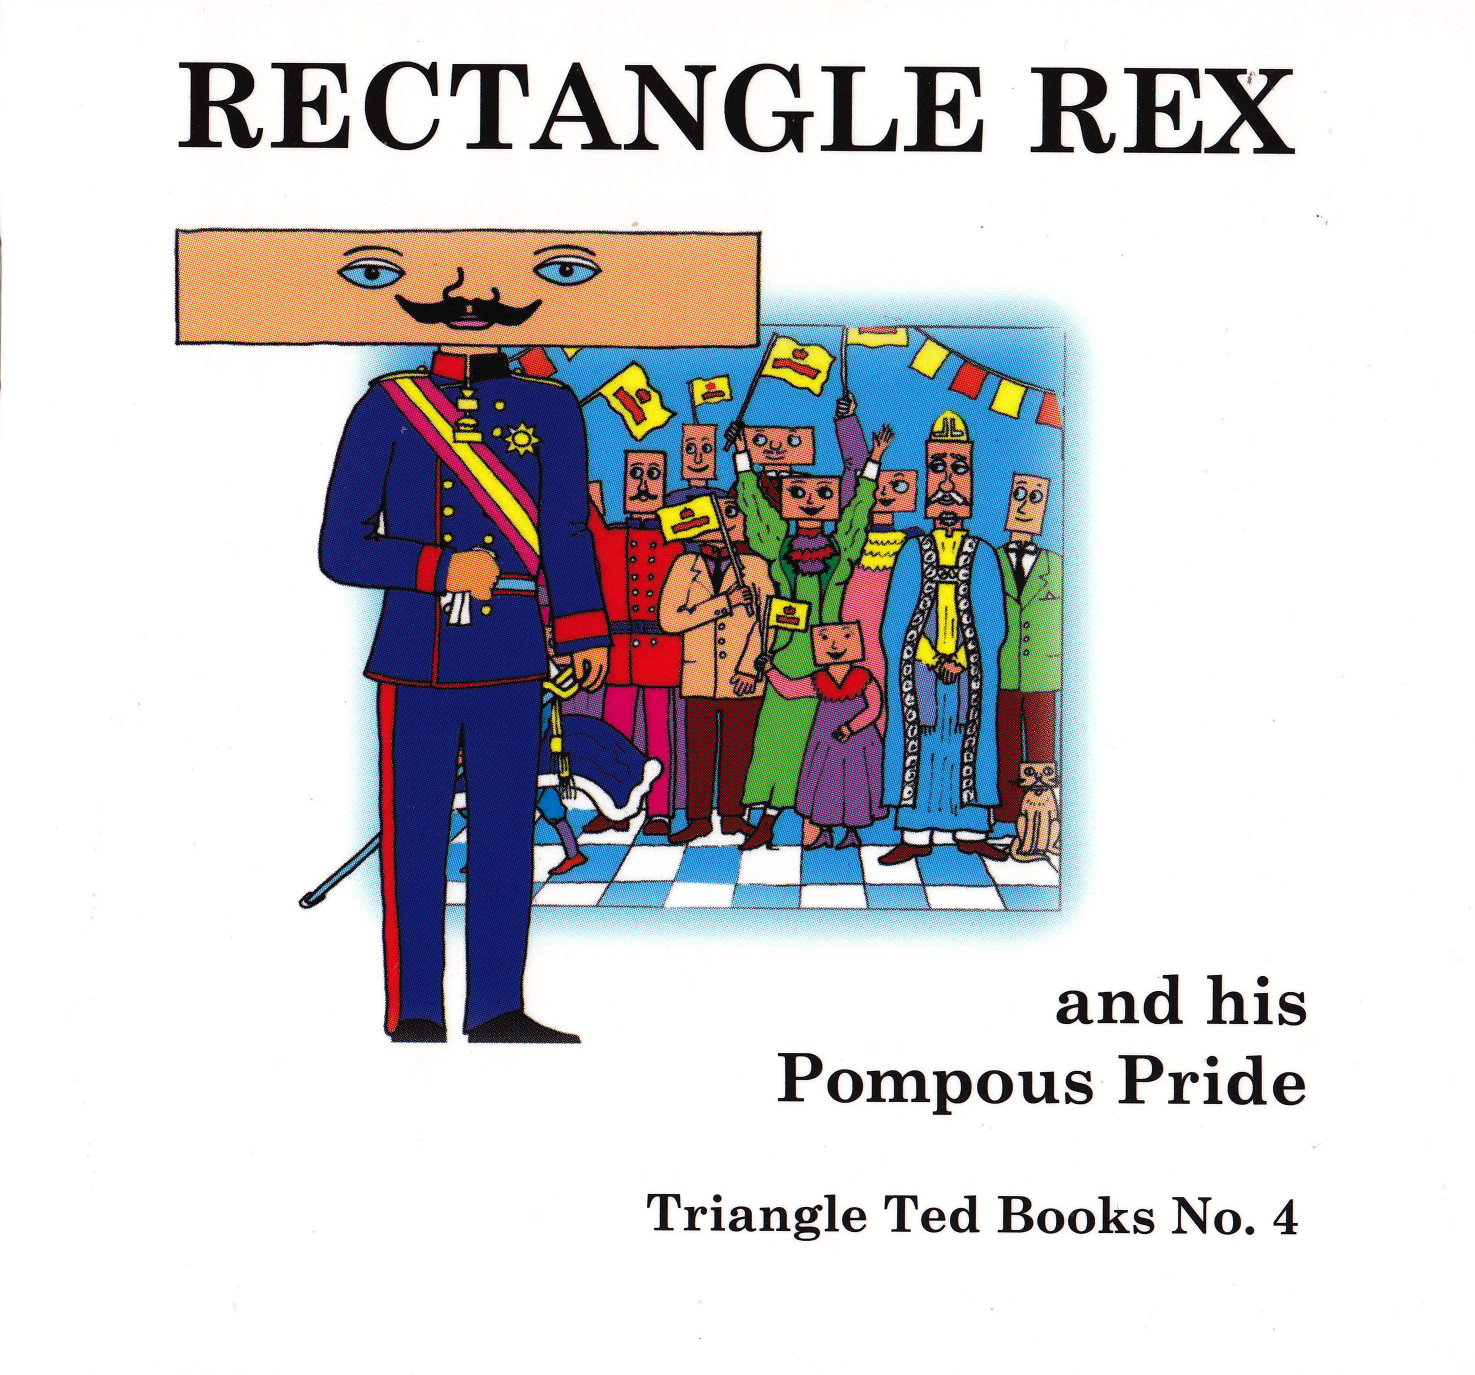 Image of RECTANGLE REX and his Pompous Pride